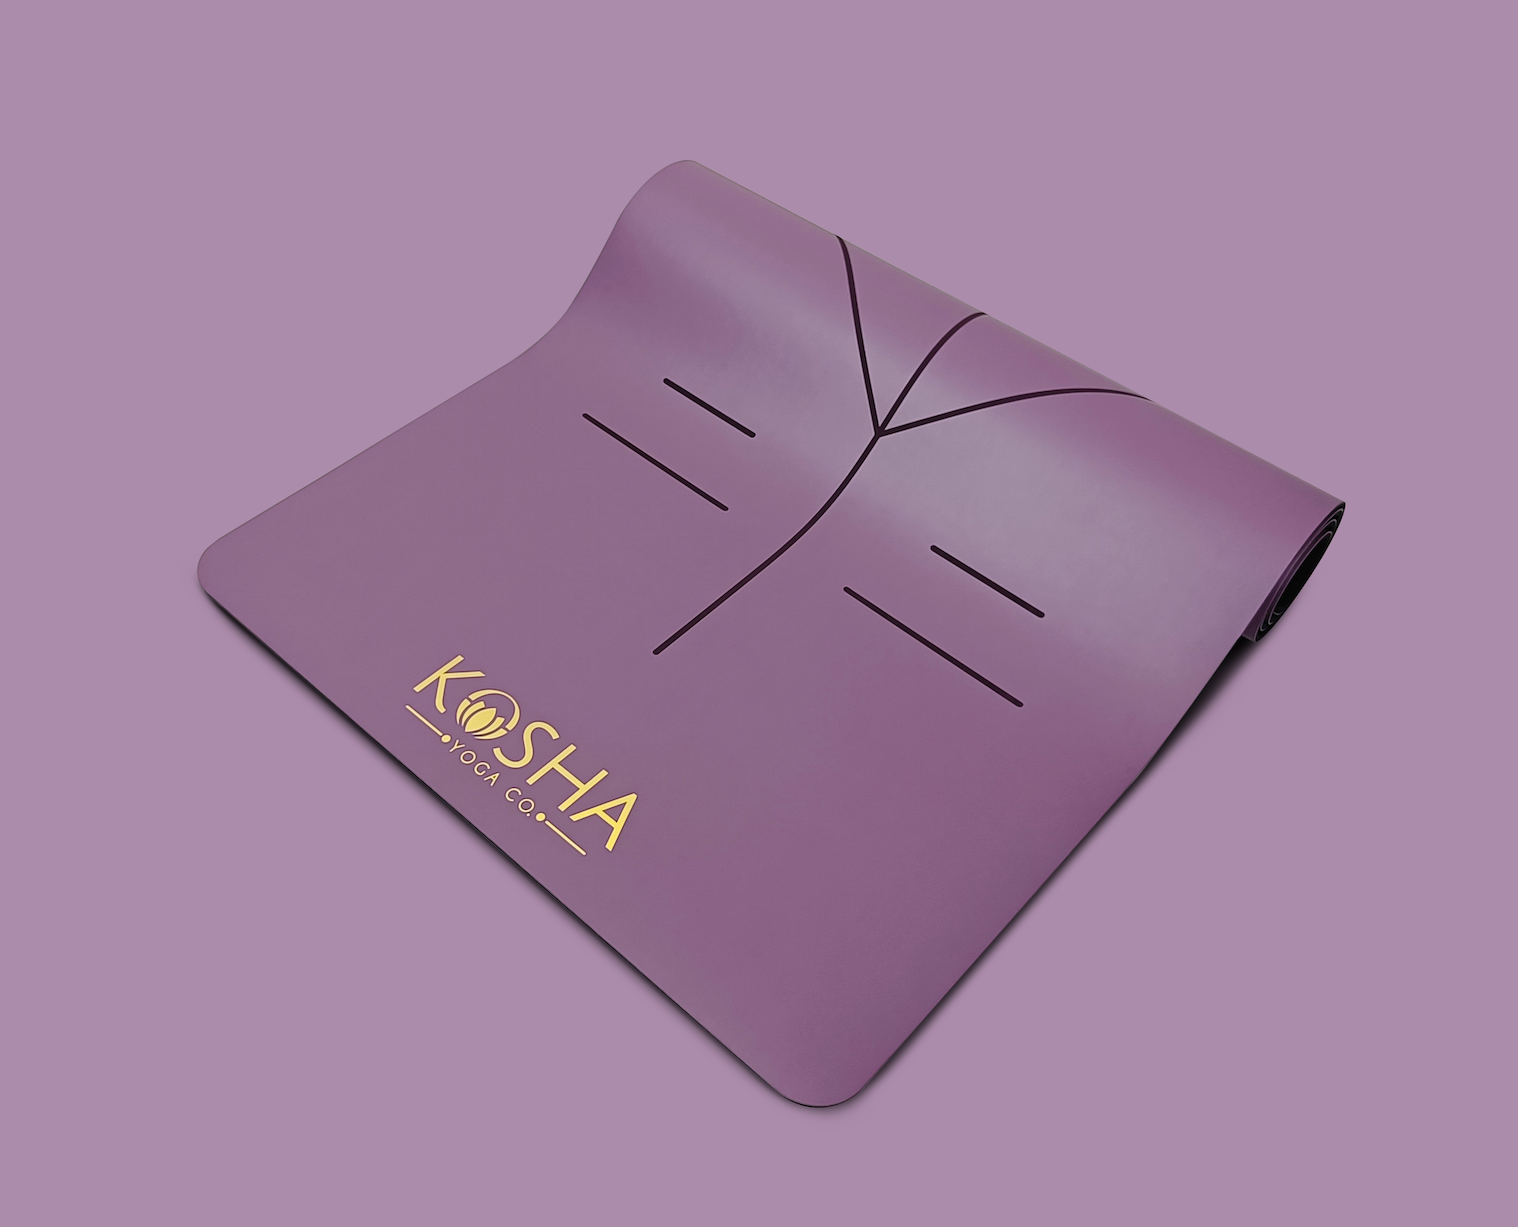 Sweat Absorbent Non Slip Rubber Yoga Mat With Alignment Lines In Purple Colour By Kosha Yoga Co for men and women